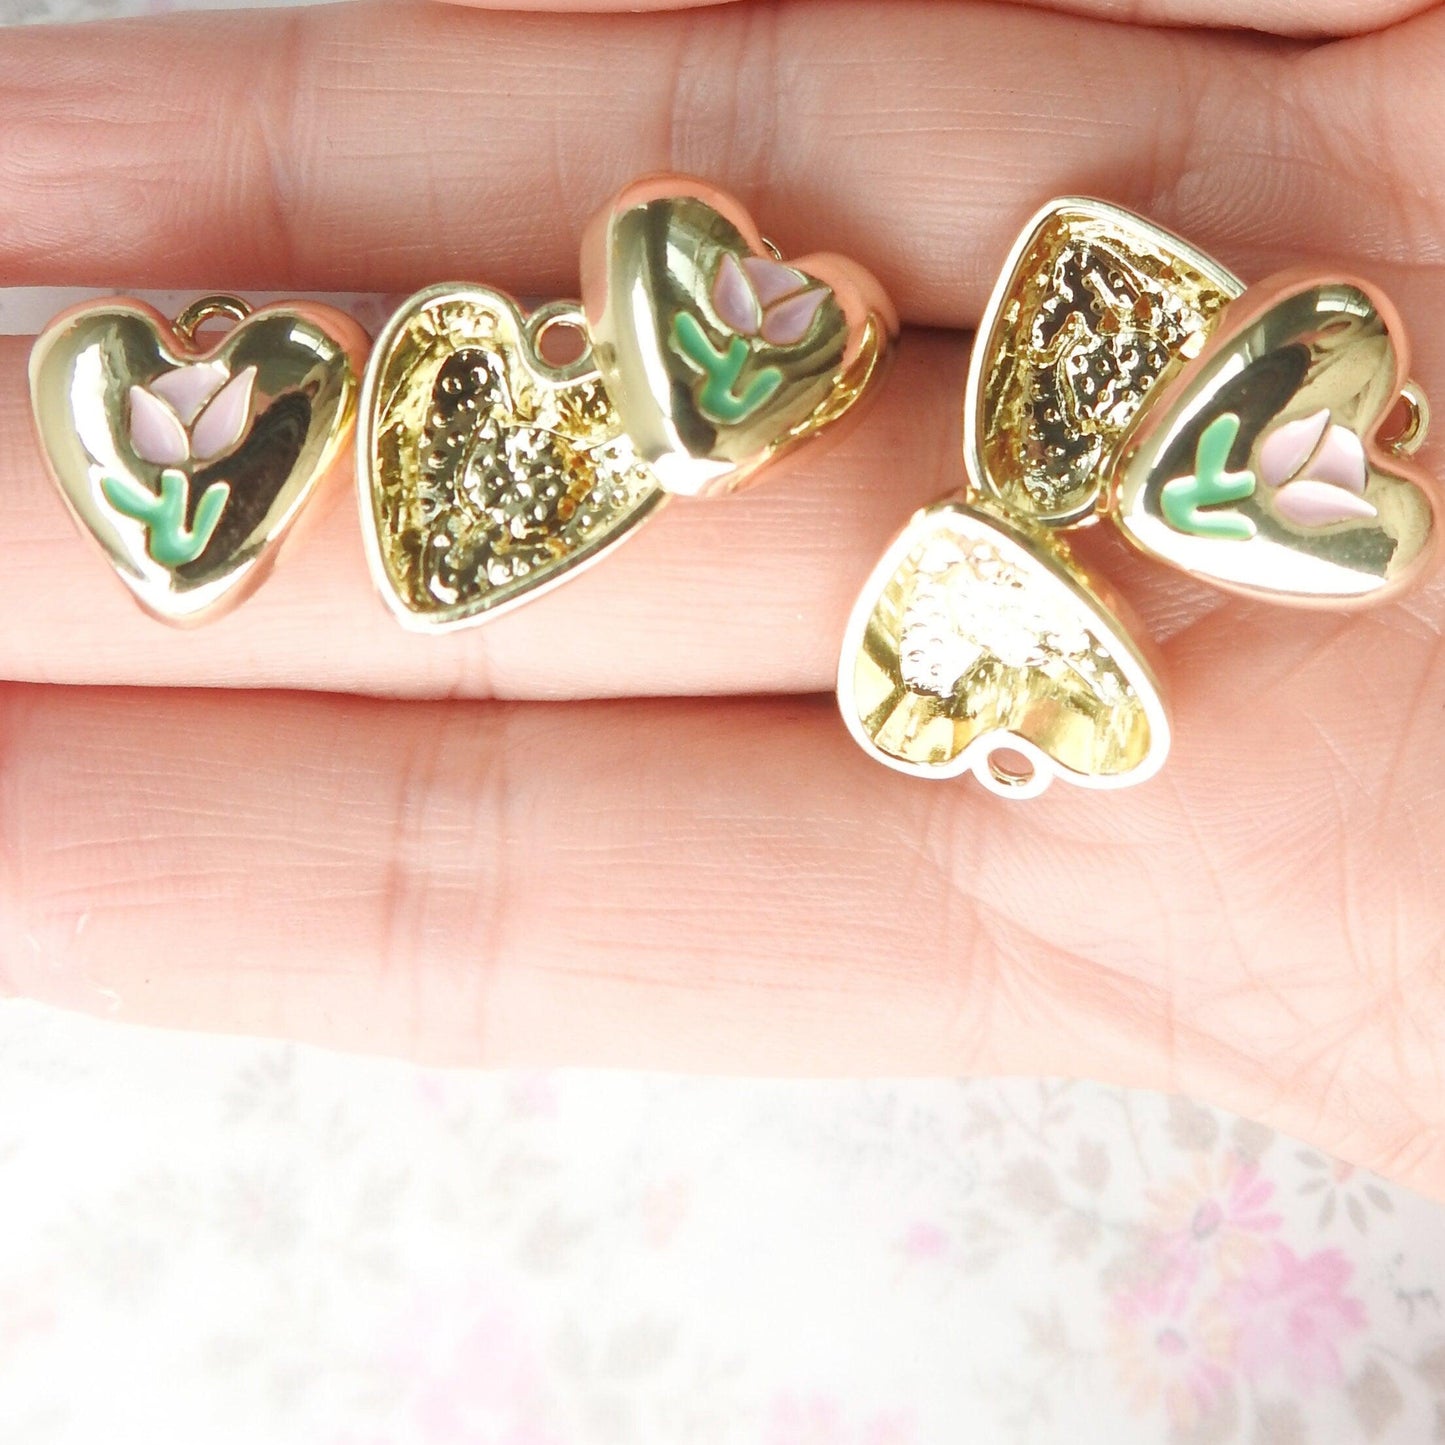 10 Heart shaped charms for bracelet, necklace, earrings, with a pink tulip flower on them. Cute jewelry-making supplies for pendants